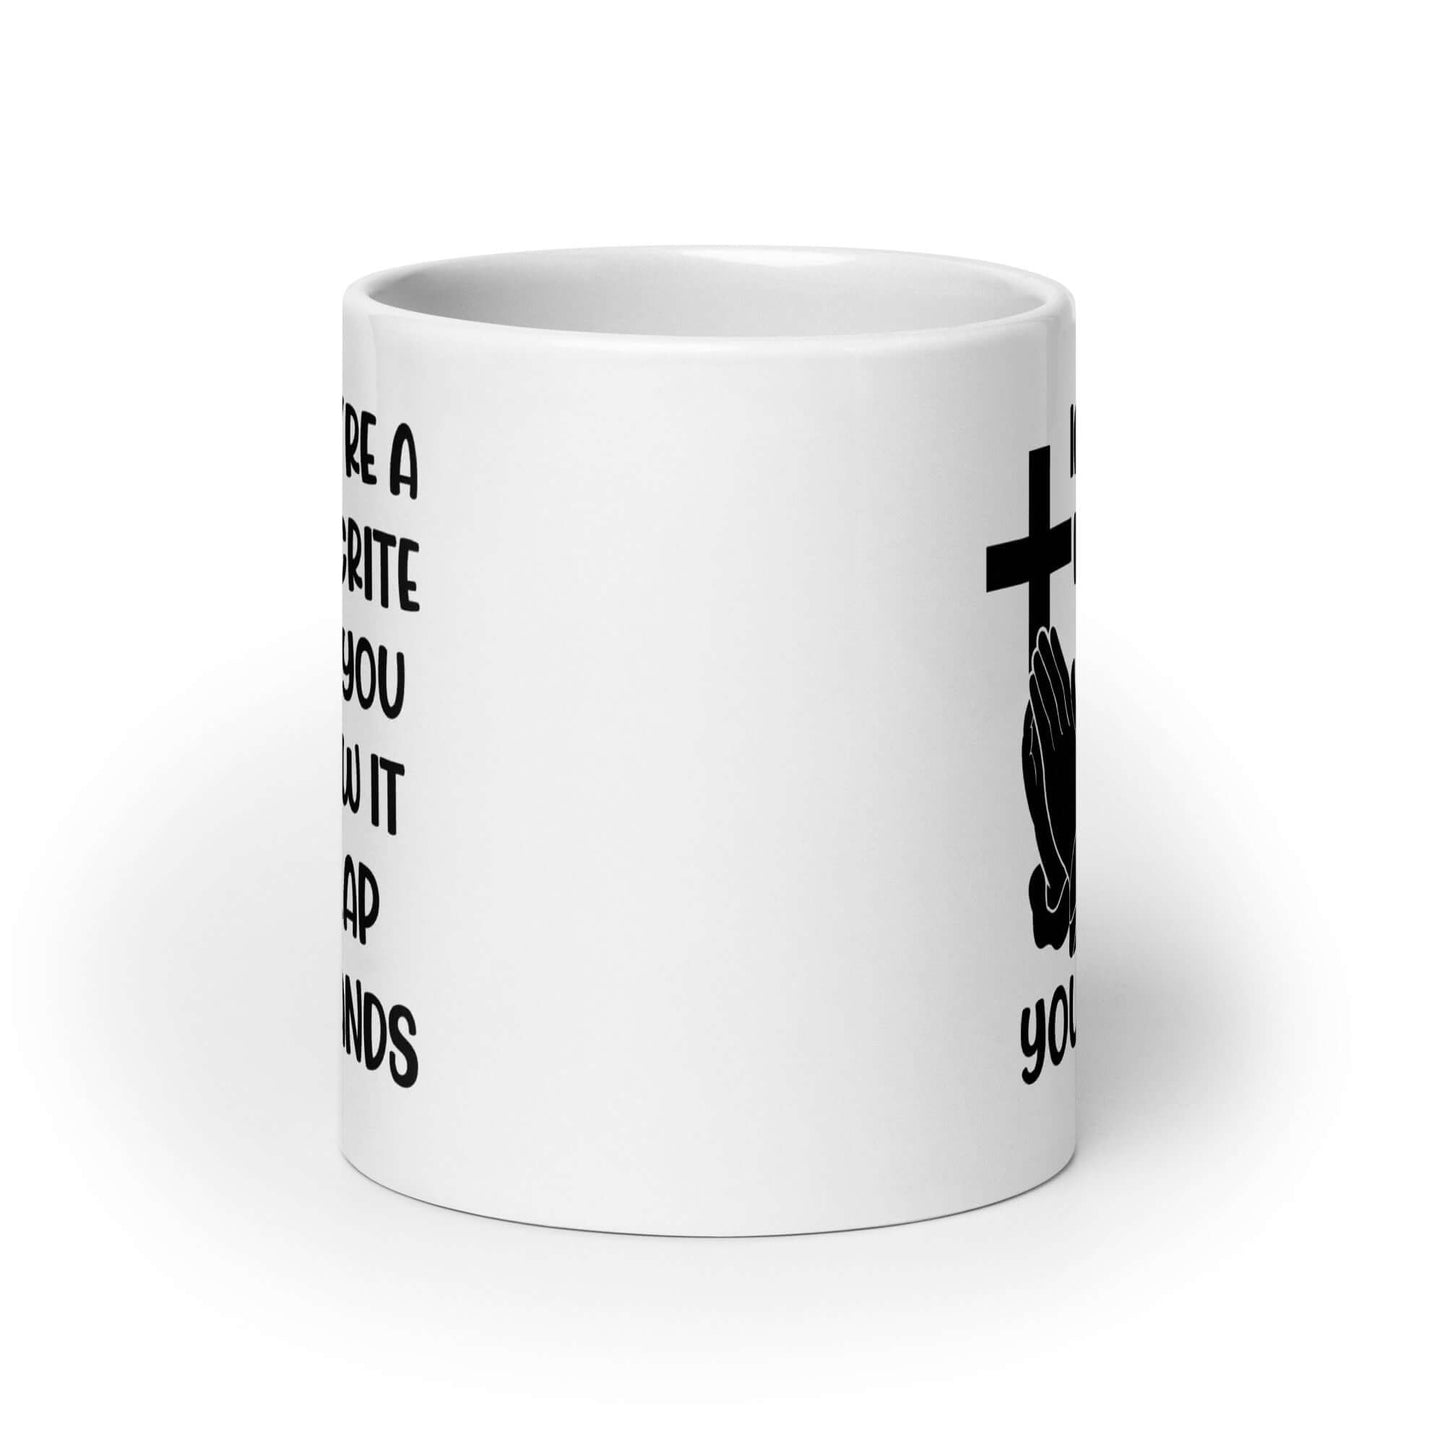 White ceramic mug with image of a cross and praying hands & the words If you're a hypocrite and you know it clap your hands printed on both sides.